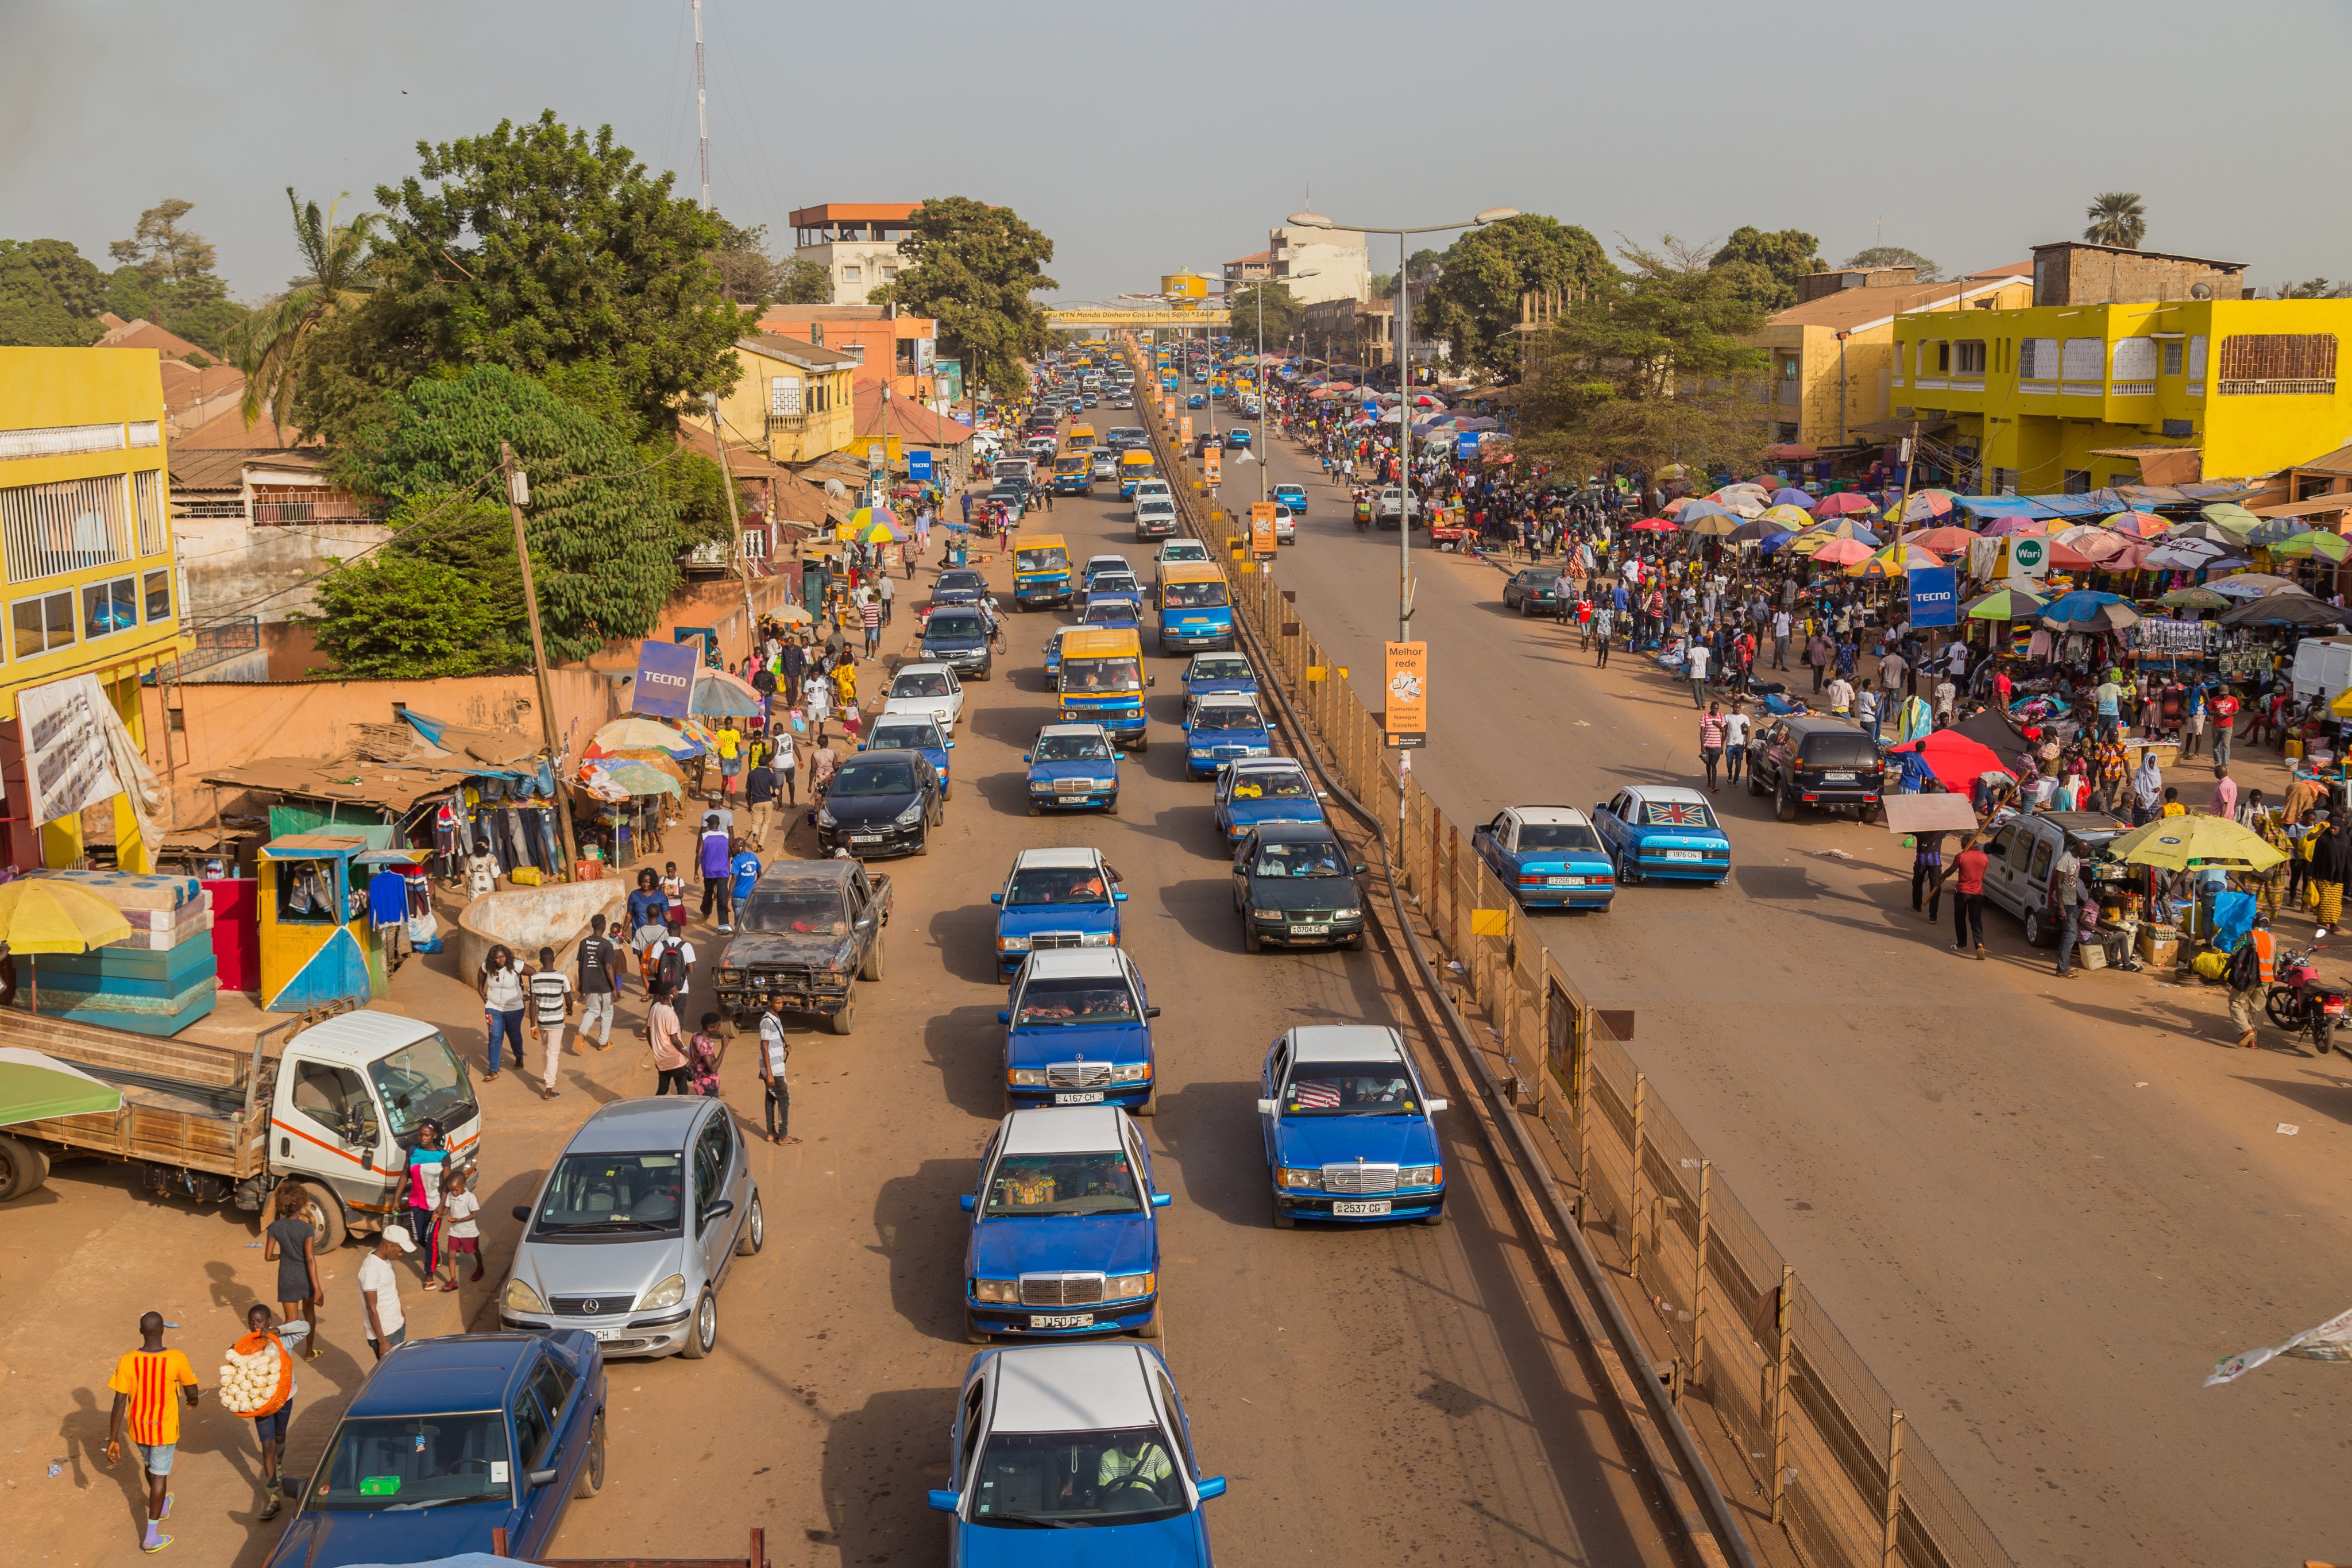 A street in Bissau, the capital of Guinea-Bissau in West Africa, which provided 100 of the 251 Hong Kong cash for residency applications. Photo: Handout